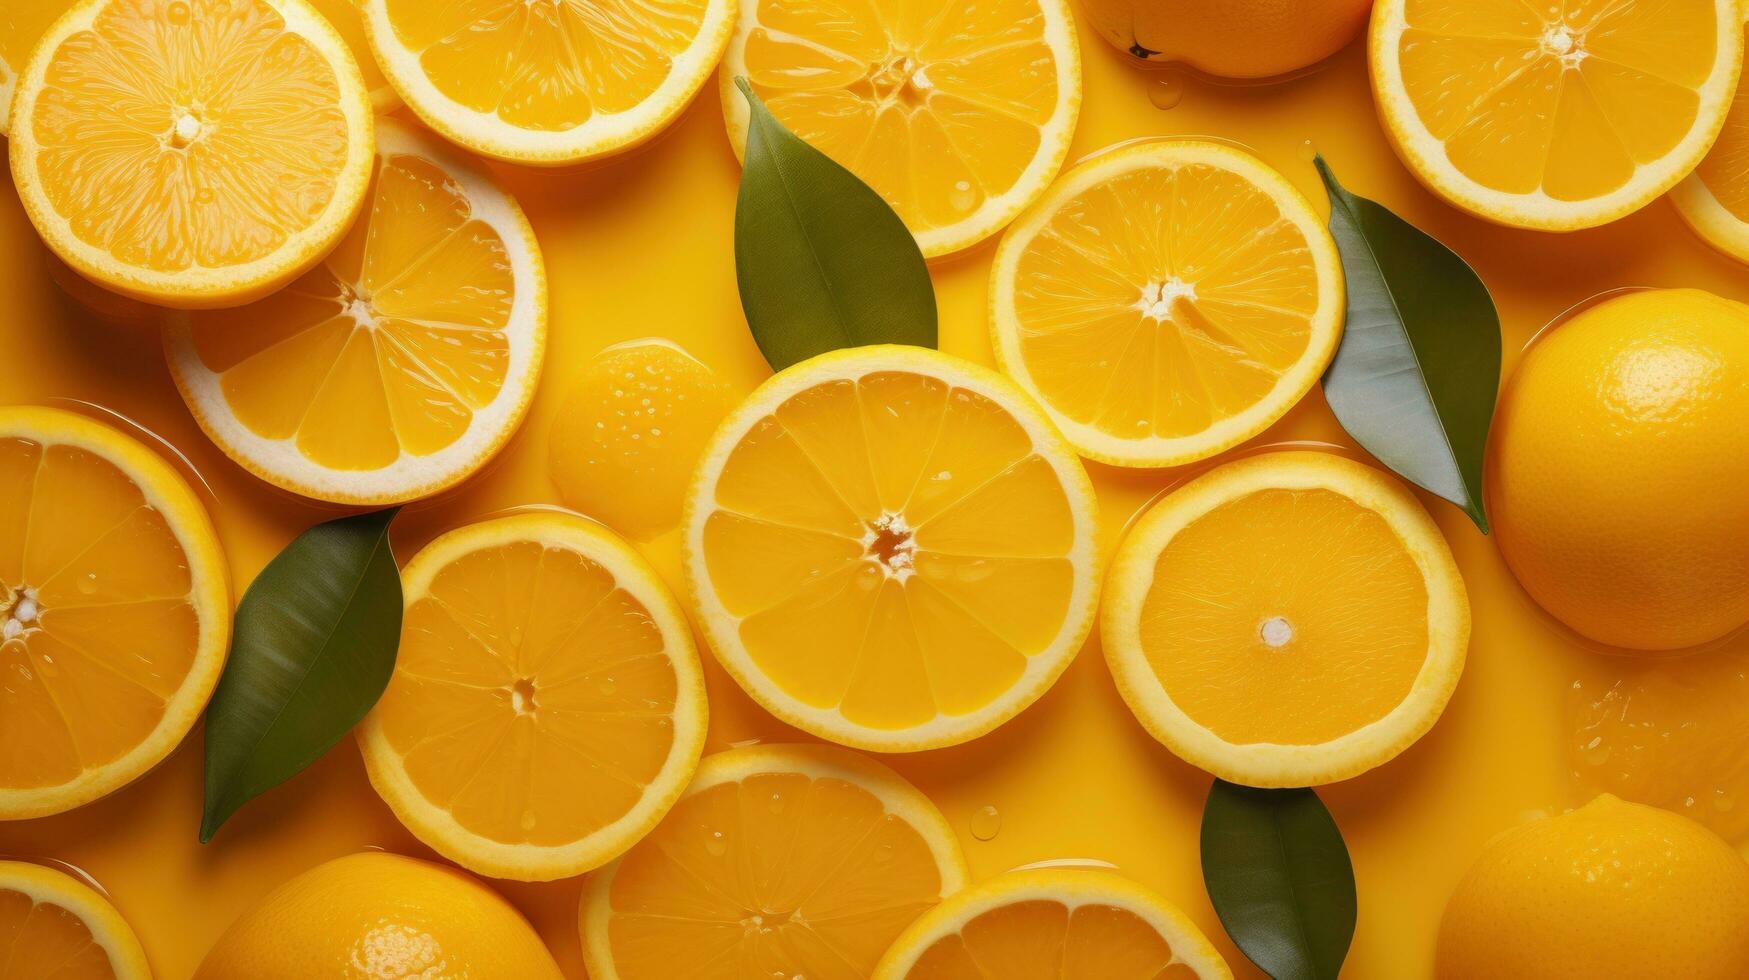 oranges, fresh green leaves and top view on yellow background photo